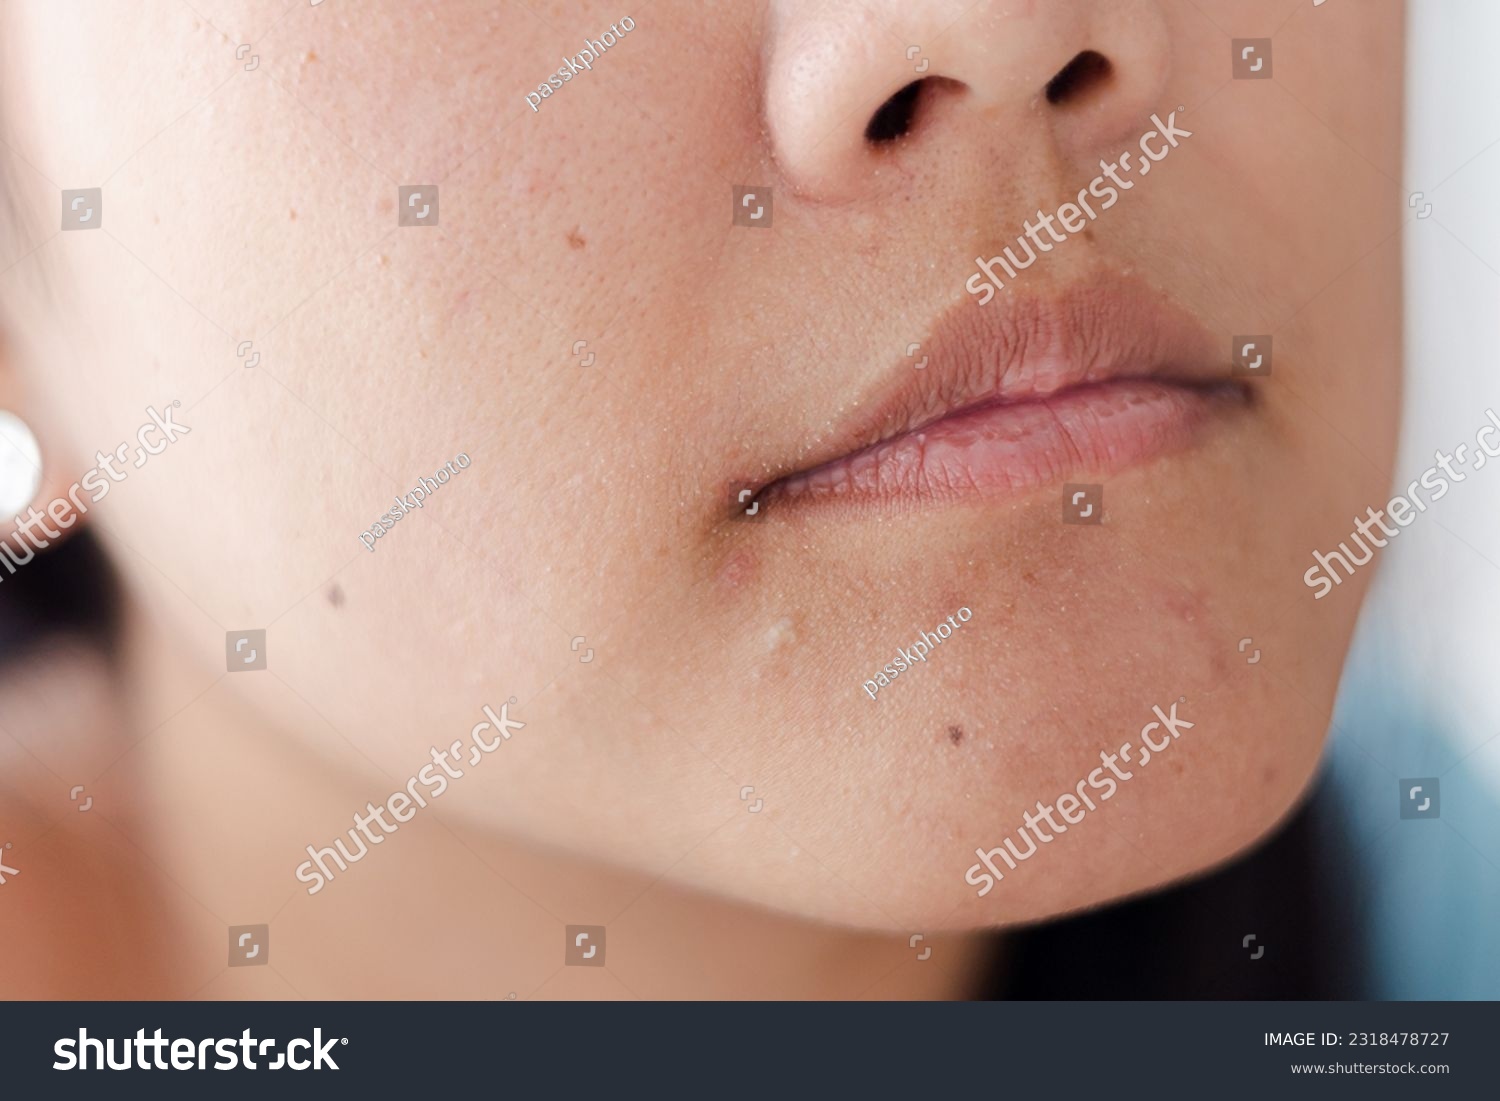 close up in selective focus of a chin with large amount of blackheads and dilated pores. Blemishes of oily and combination skin. Rough face skin with blackheads in relief. #2318478727